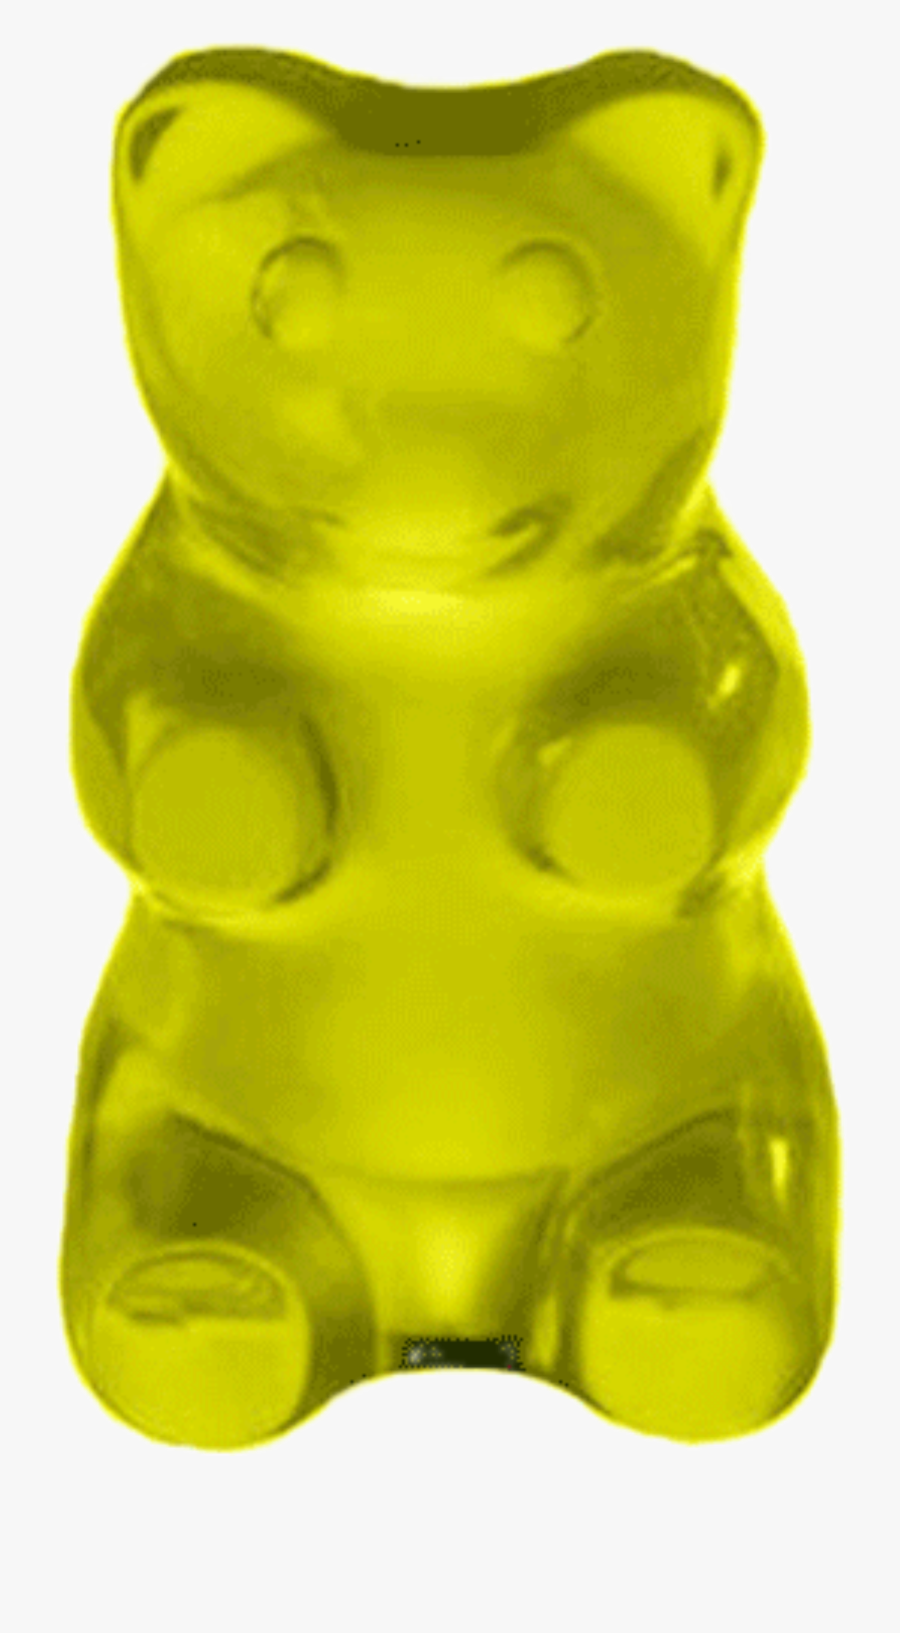 Clipart Library Bear Haribo Free On Dumielauxepices - Transparent Green Gummy Bear, Transparent Clipart